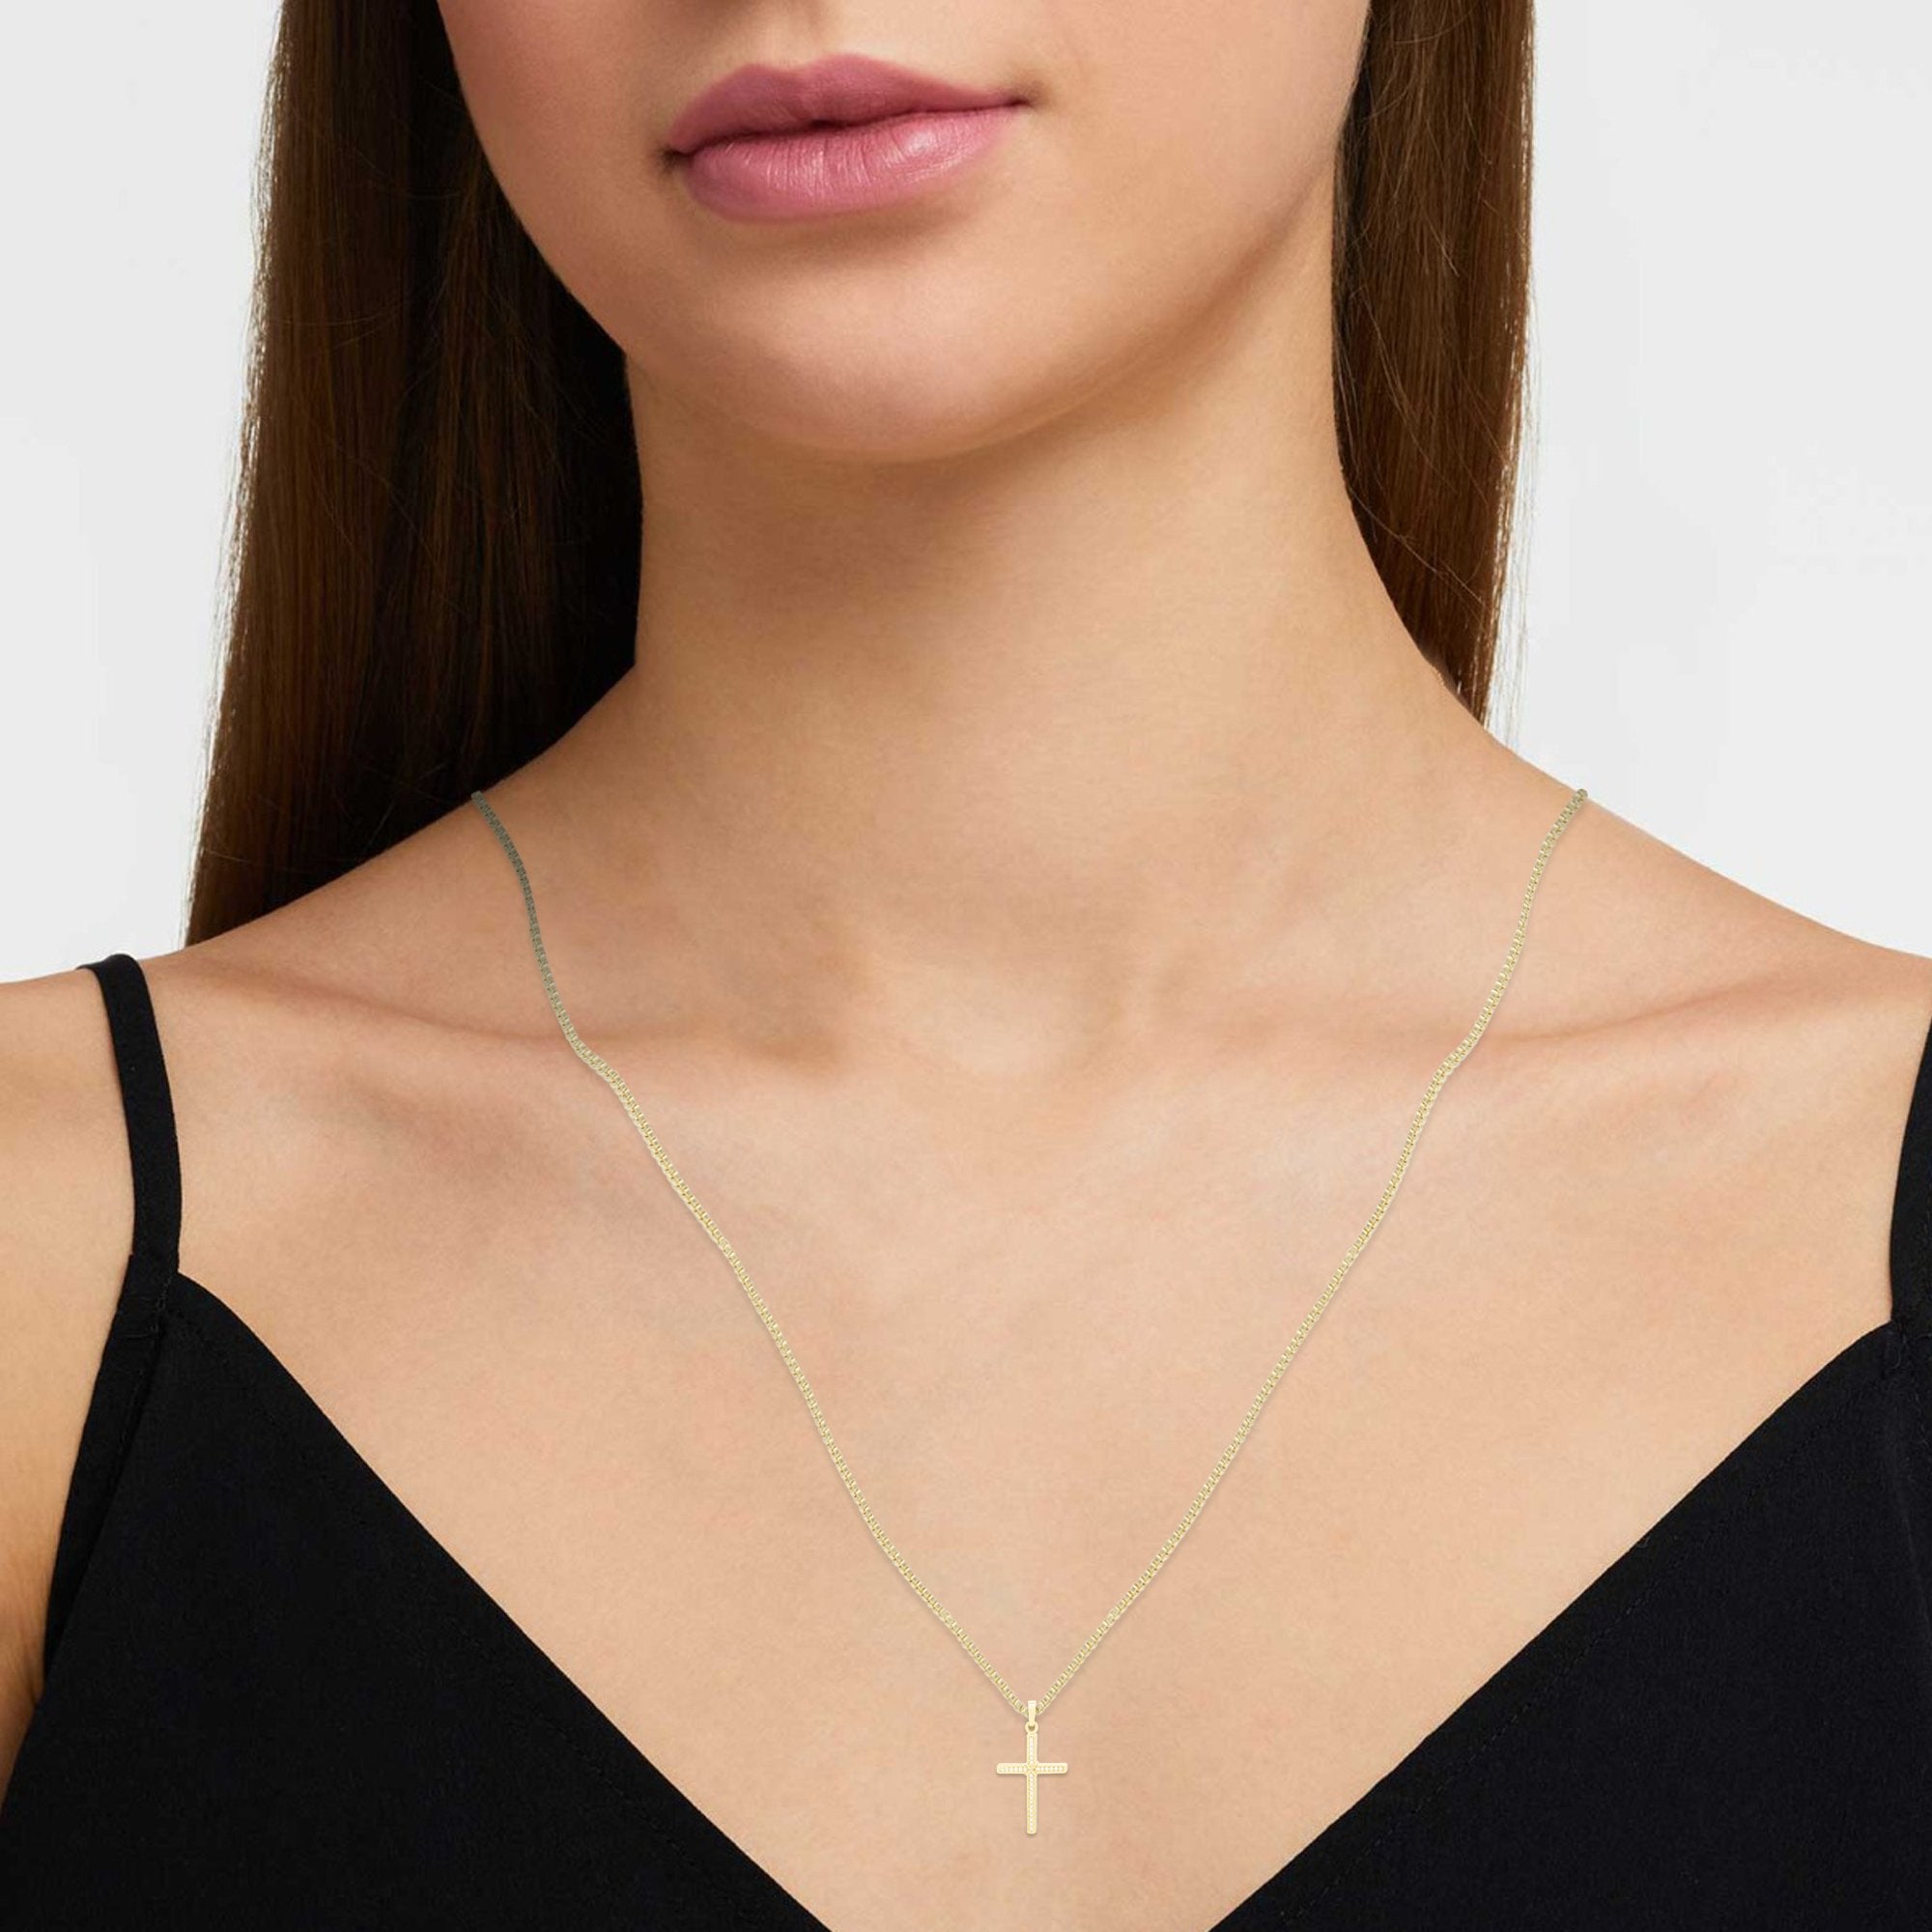 Thin Cross Cubic Zirconia Pendant With Necklace Set 14K Gold Filled